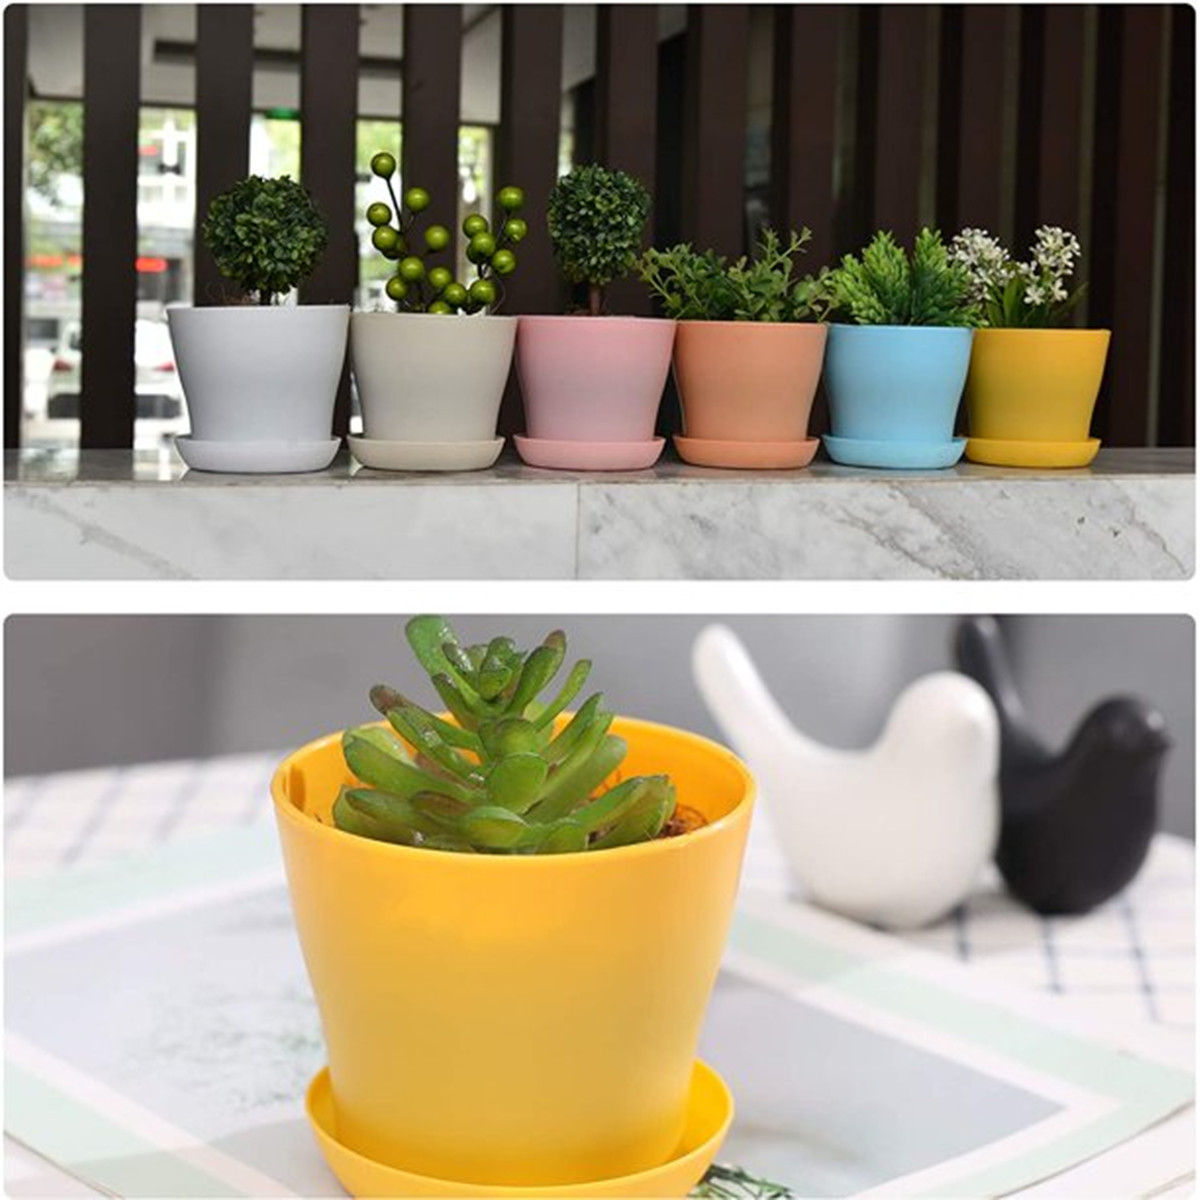 Bexikou Plant Pots, 8 Pack Plastic Flower Pots Outdoor Garden Planters with Multiple Drain Holes and Saucer -4.7 inch Indoor Small Plant Pots for All Home, Random Color - image 2 of 6